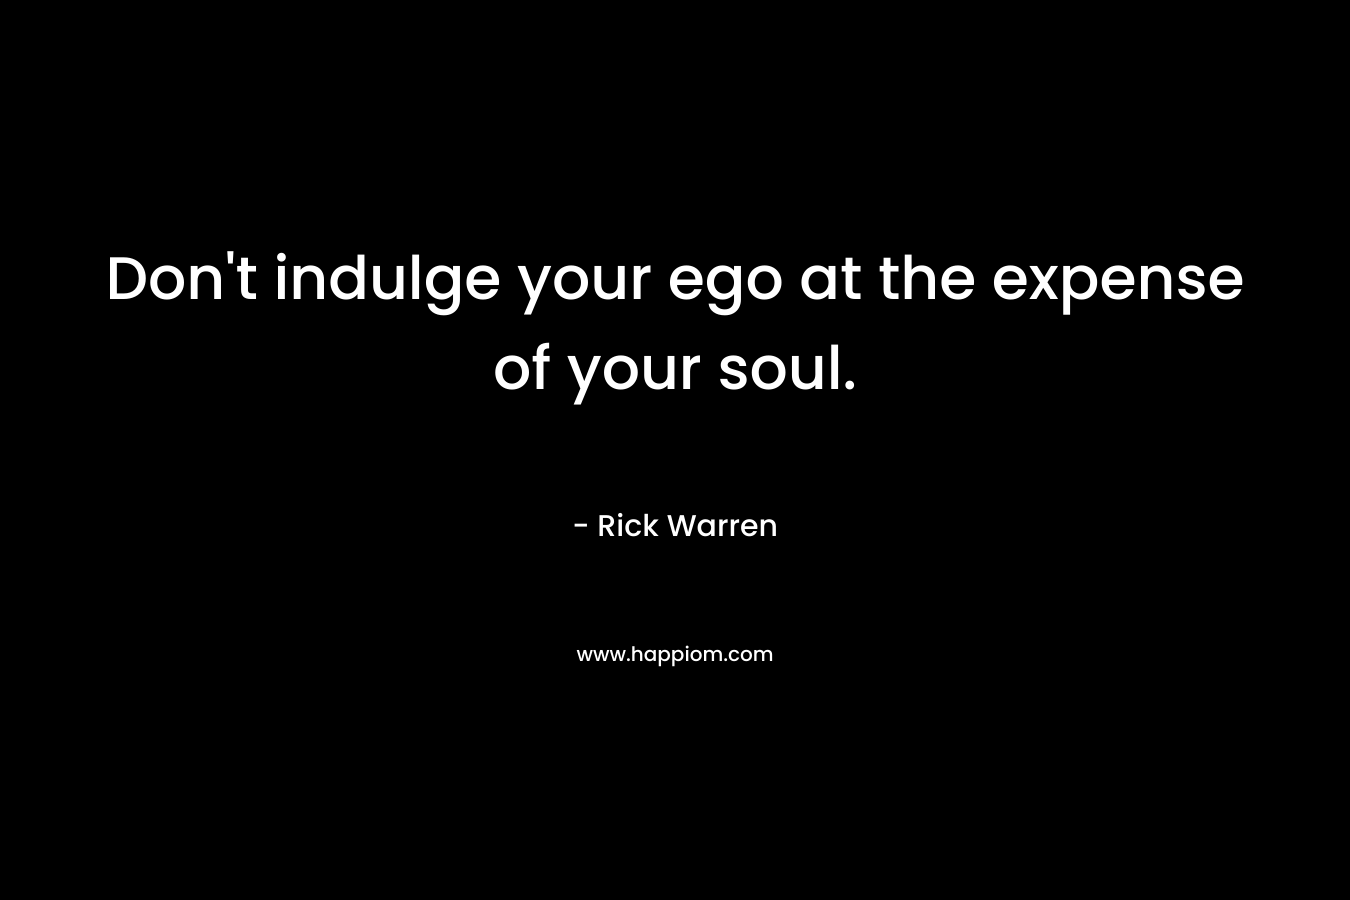 Don’t indulge your ego at the expense of your soul. – Rick Warren